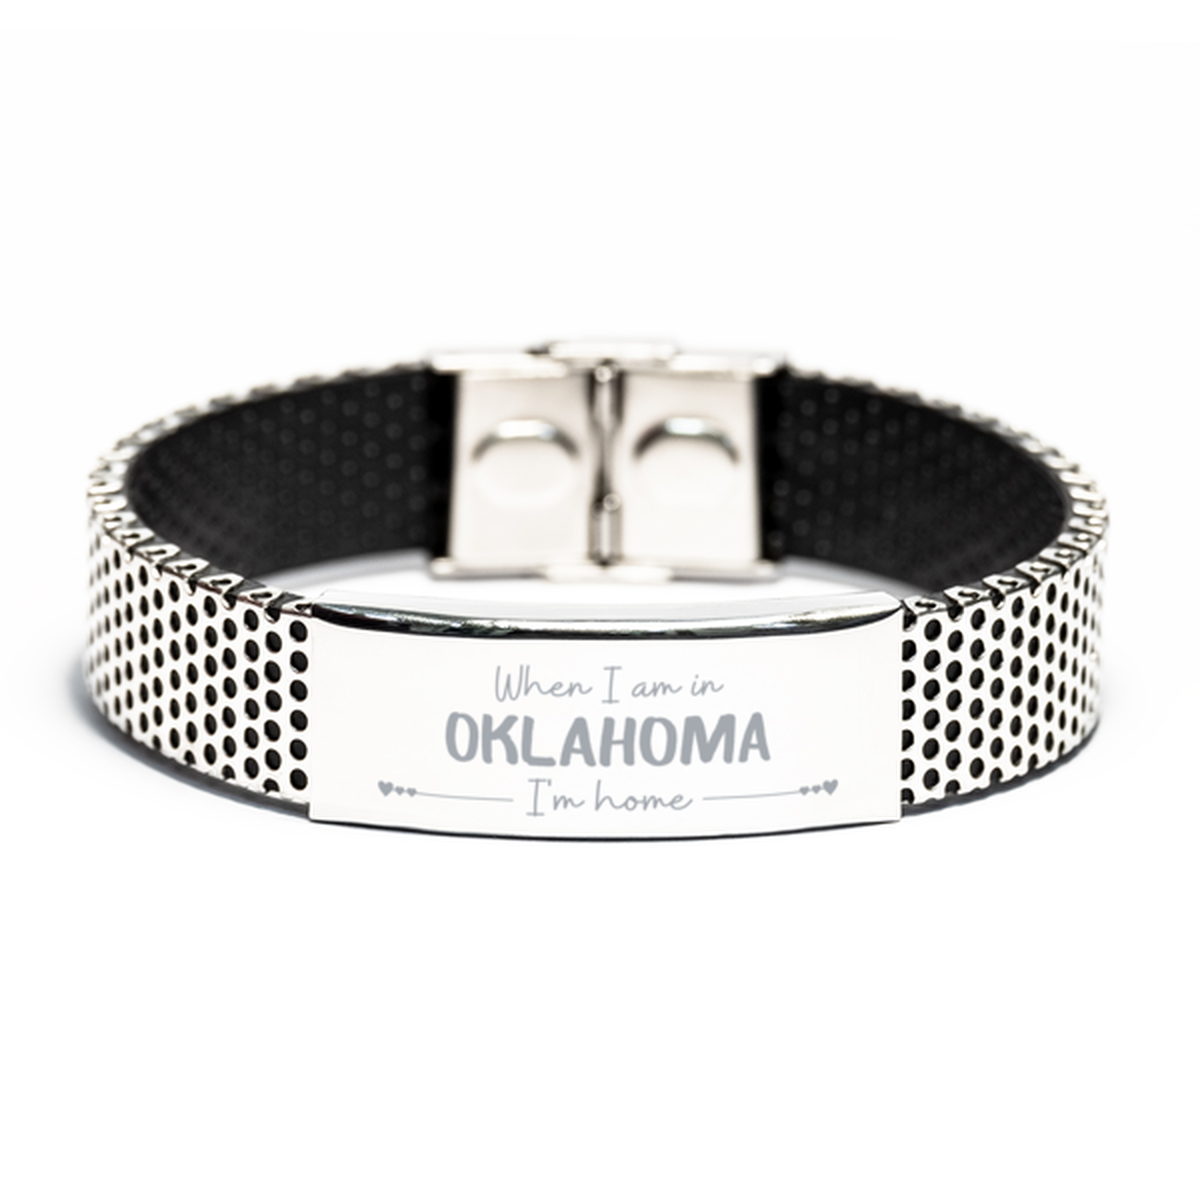 When I am in Oklahoma I'm home Stainless Steel Bracelet, Cheap Gifts For Oklahoma, State Oklahoma Birthday Gifts for Friends Coworker